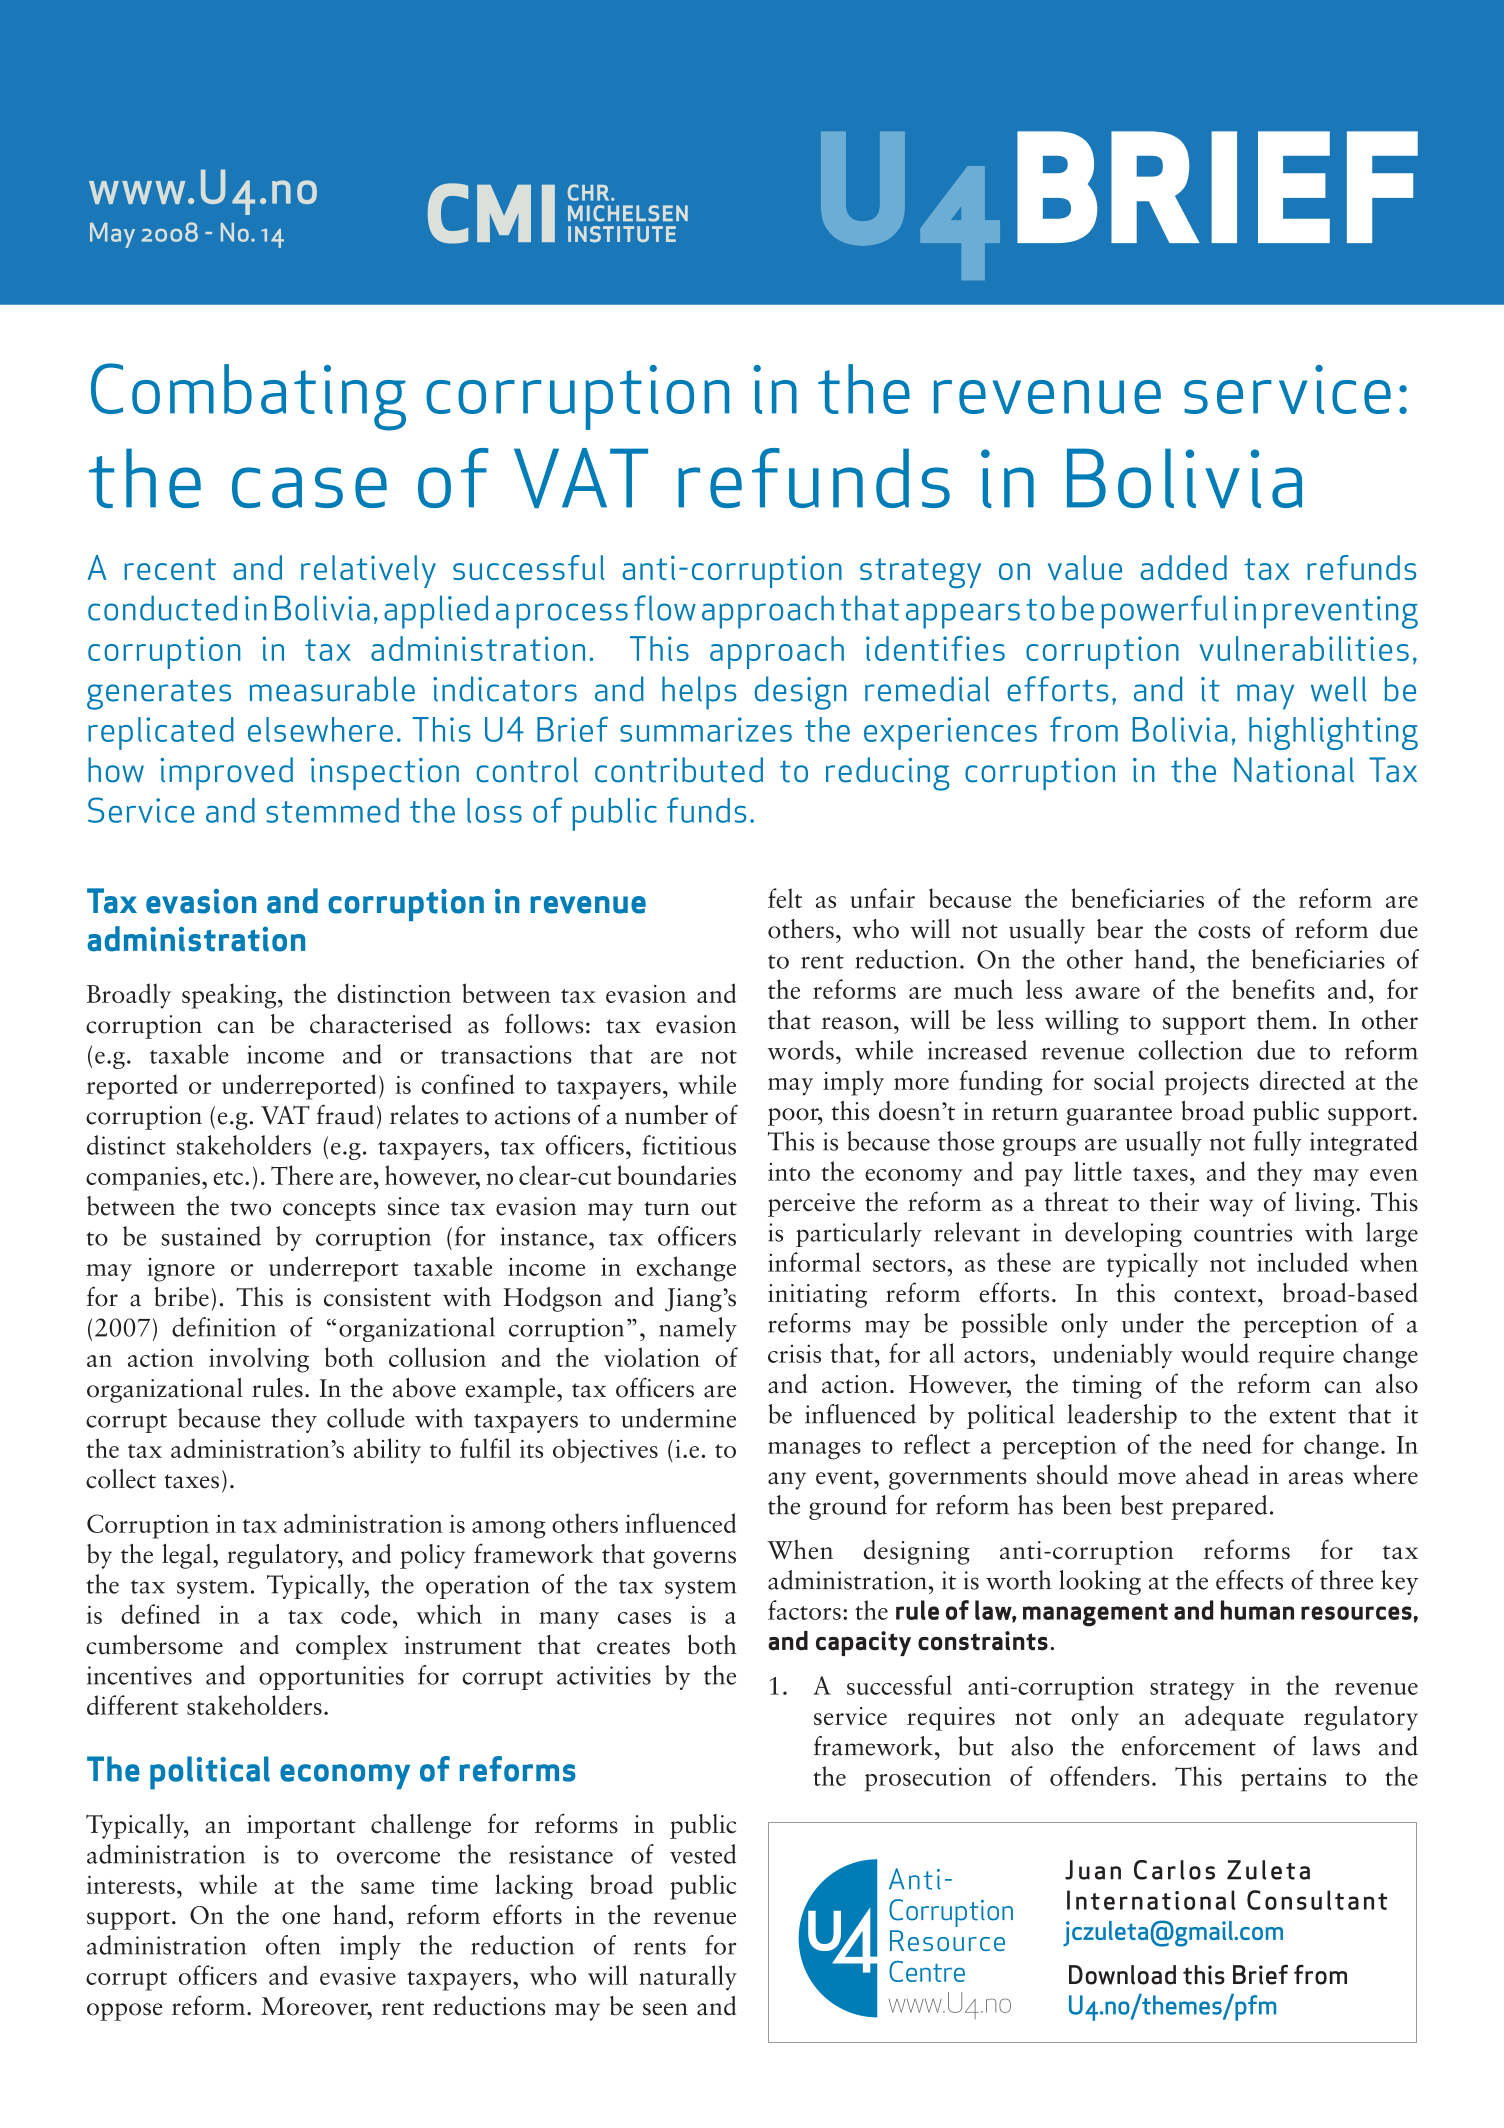 Combating corruption in the revenue service: The case of VAT refunds in Bolivia